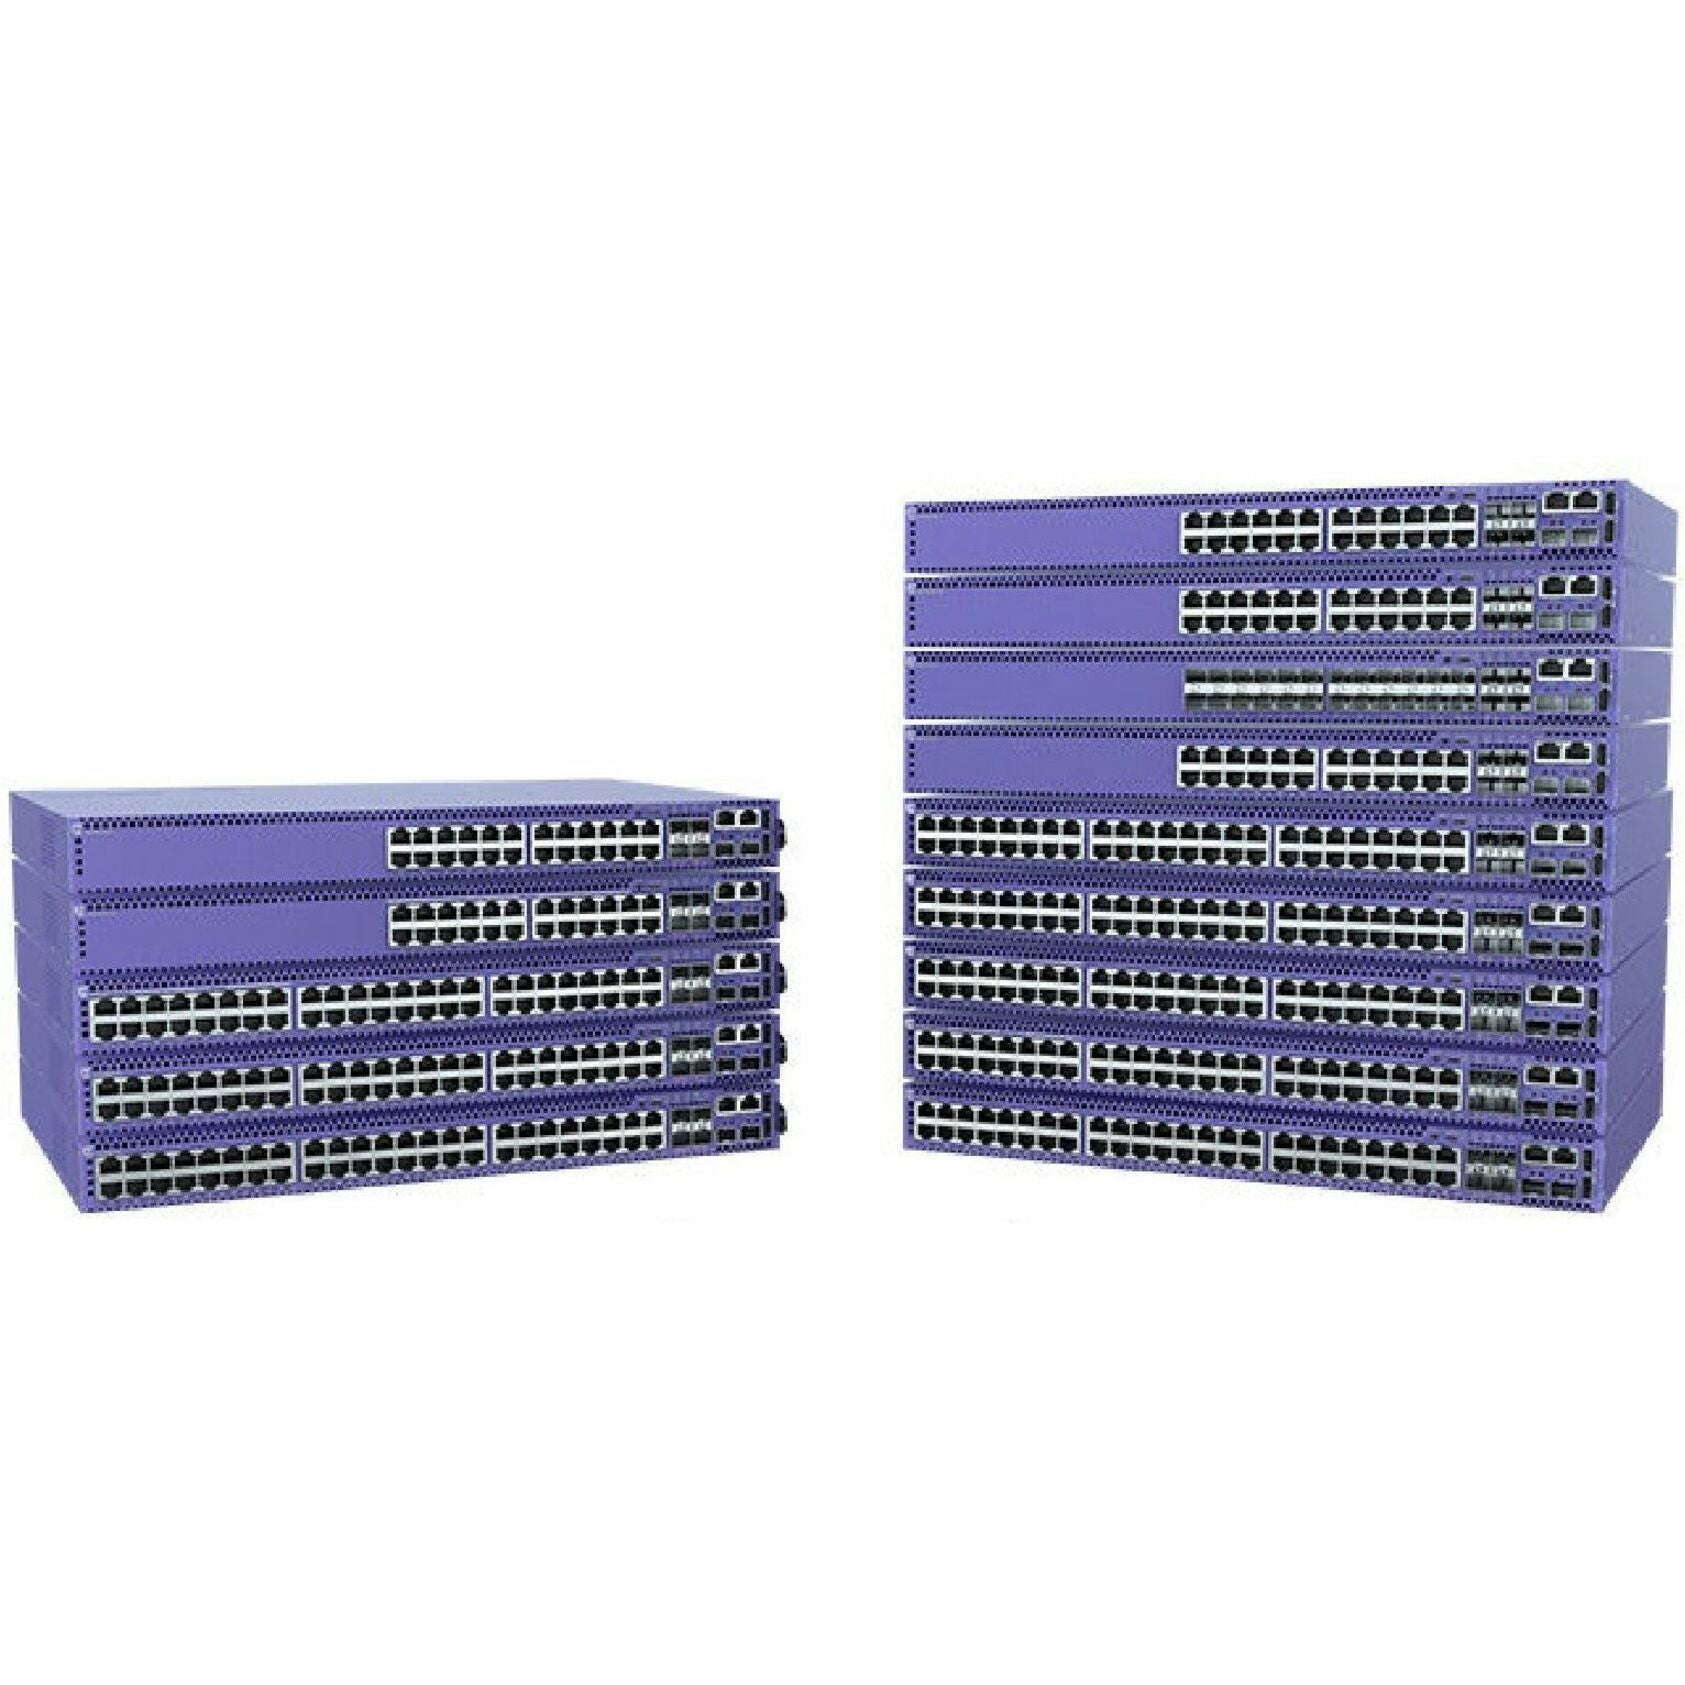 Extreme Networks 5420F-48T-4XE ExtremeSwitching 5420F Ethernet Switch, 48-Port Gigabit Ethernet Network